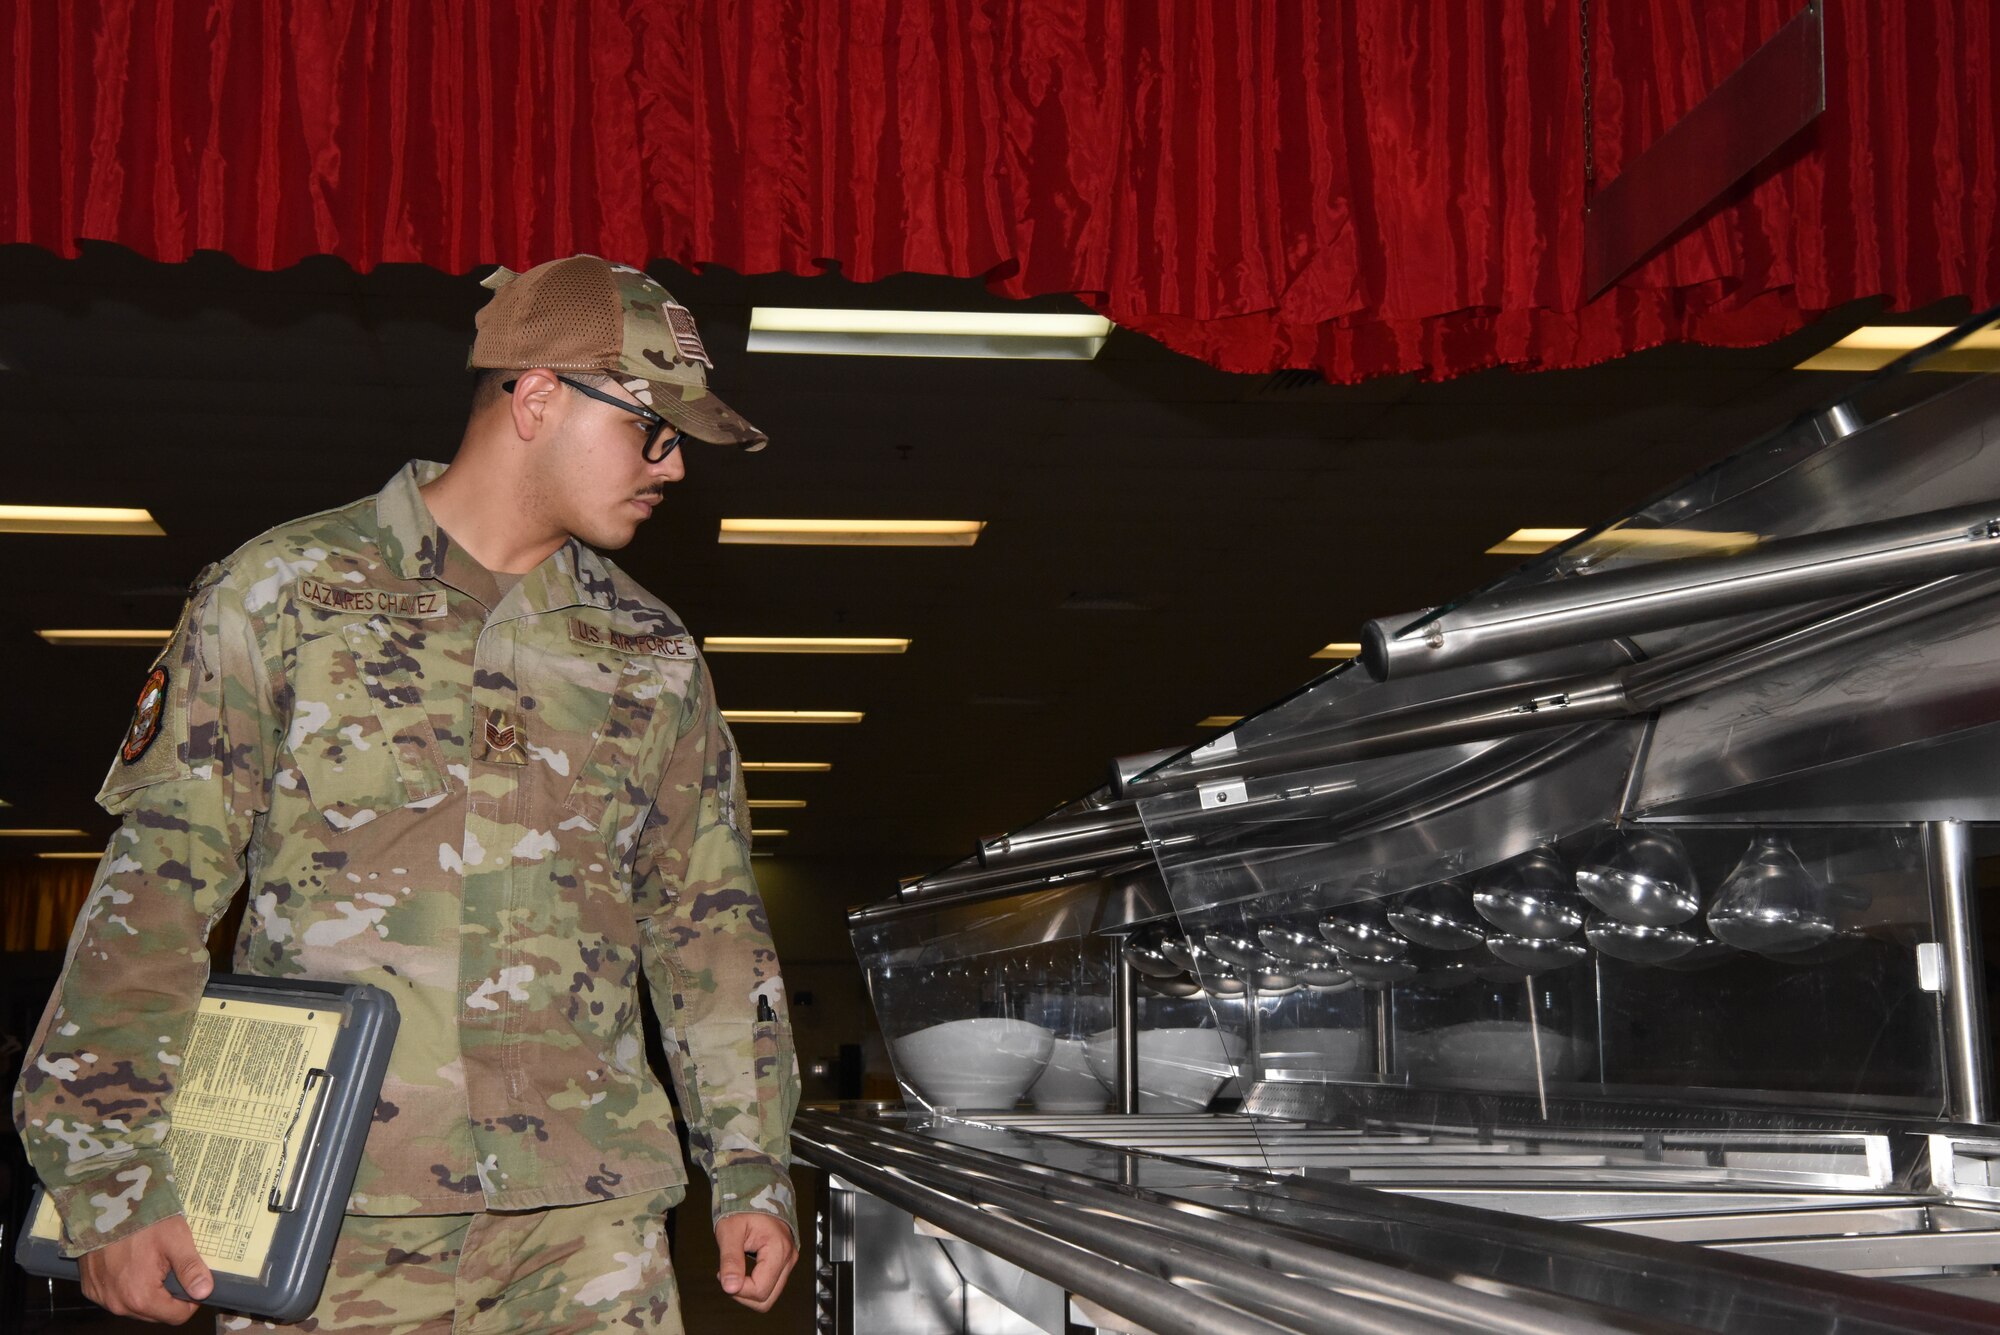 Dining Facility re-opened Oct 1, 2019 after closing for two months to address maintenance issues concerning pests. Immediately following the closure, organizations around the installation worked together to determine and address all the maintenance issues that led to the closure. Prior to opening the facility, Public Health conducted a pre-operational inspection that evaluated everything from facility manager knowledge and employee health, to food operation, facility repair, food defense, equipment validation and cleanliness.